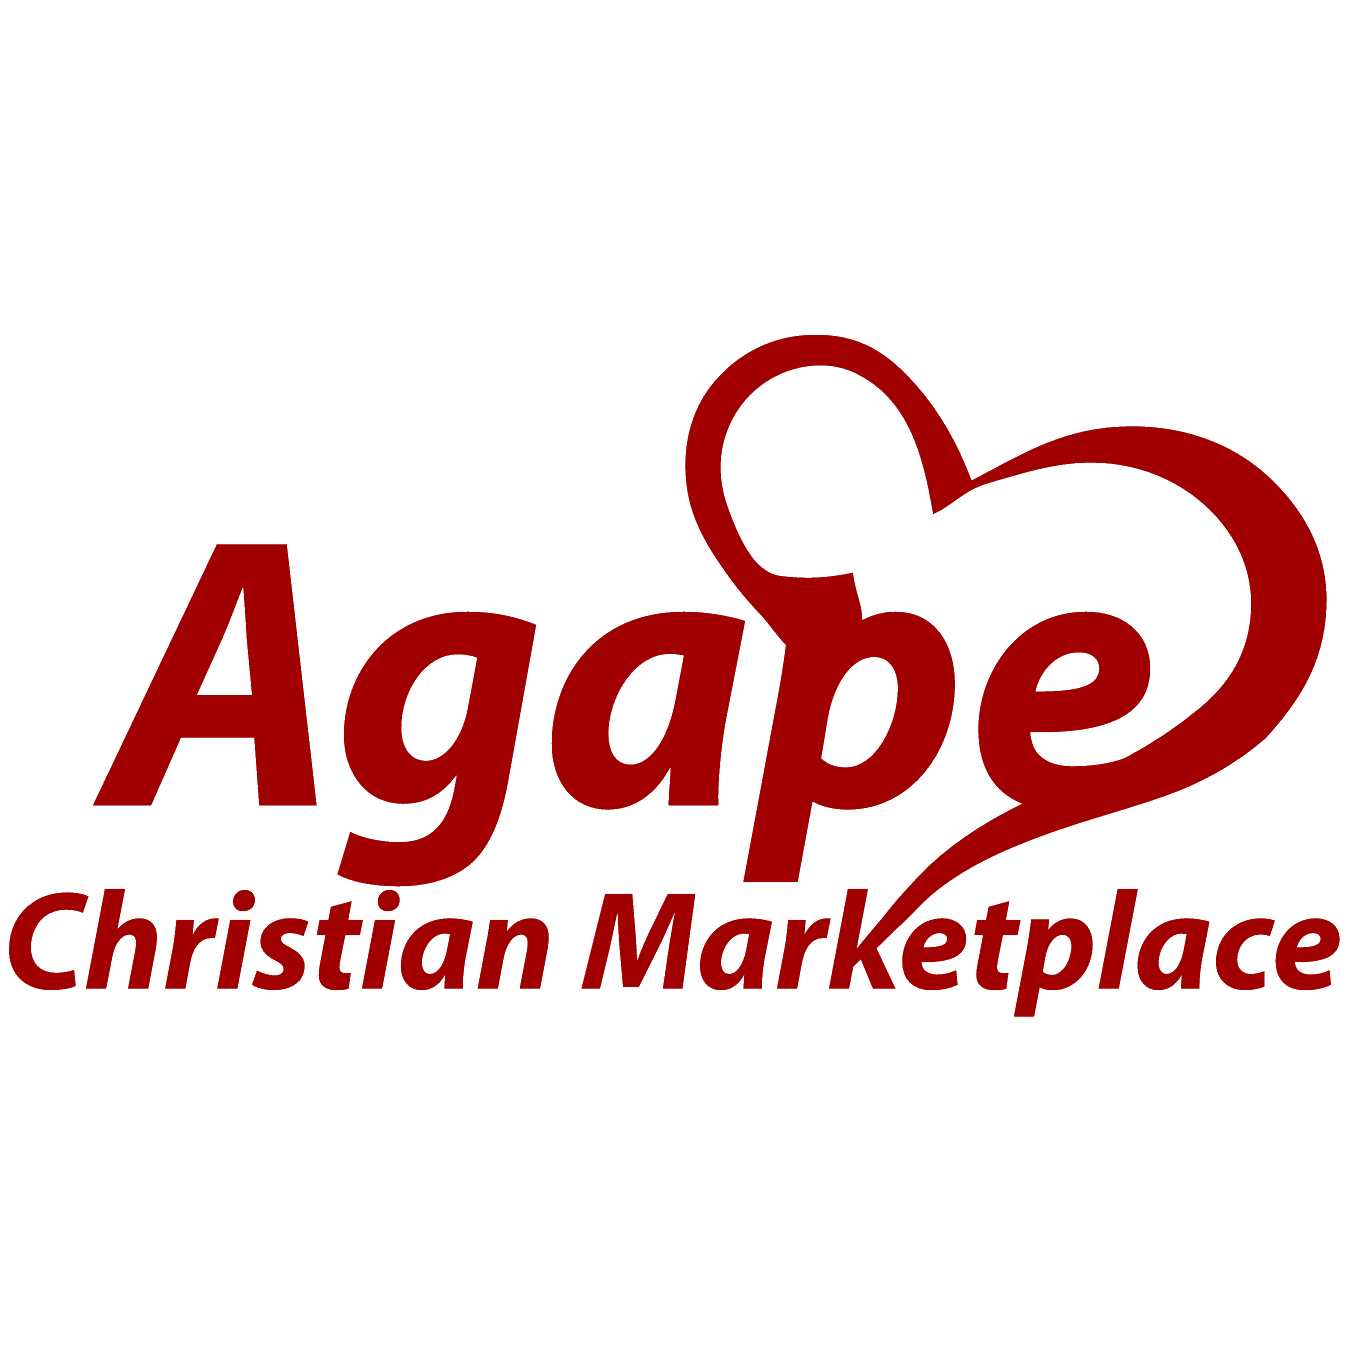 Agape Christian Marketplace in Concord: Agape Christian Marketplace Concord, ON